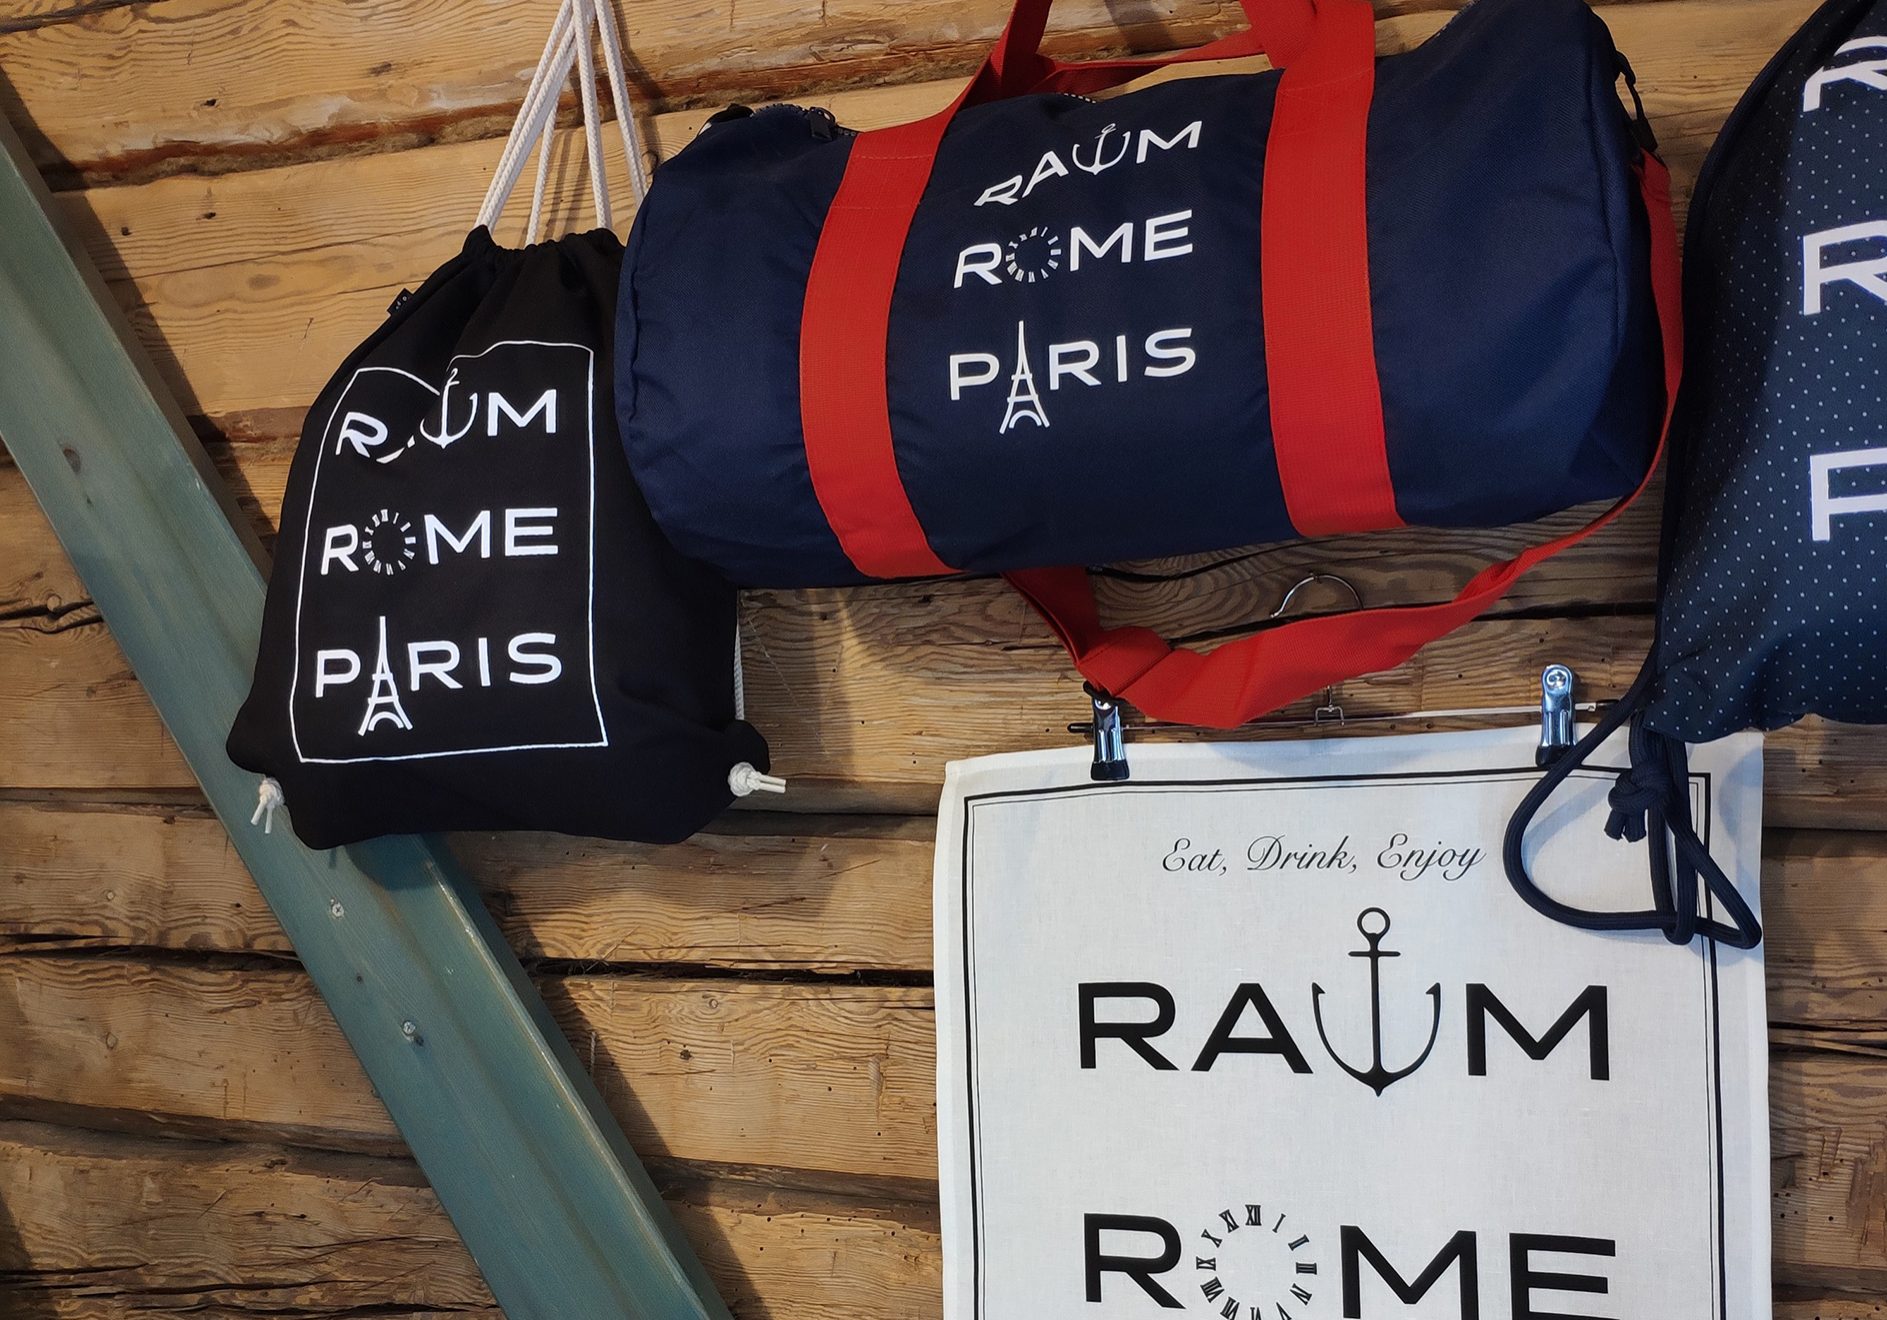 Raum. Rome. Paris. Bags hanging on the wall.